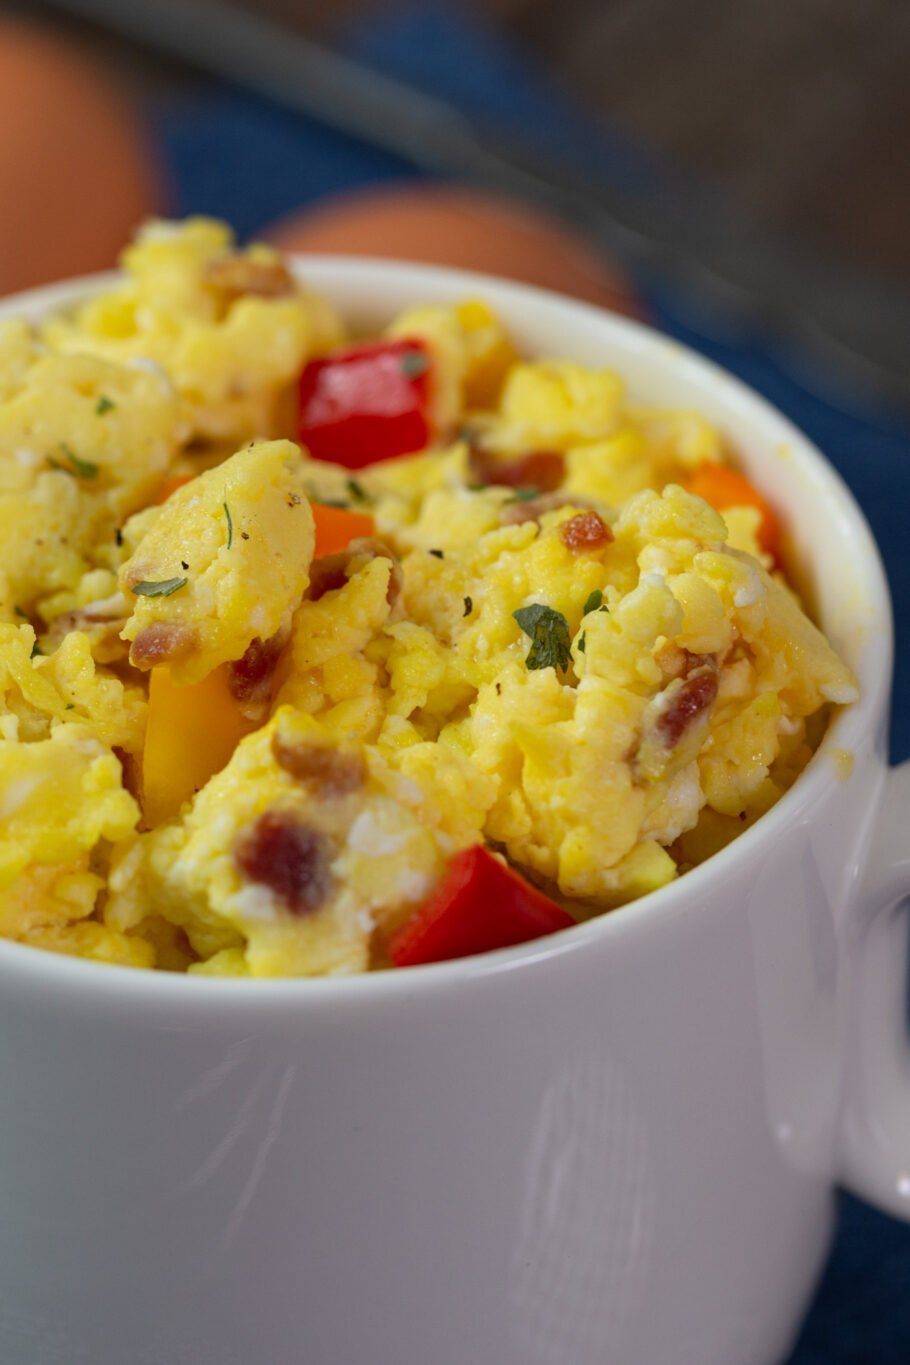 https://media.theproteinchef.co/wp-content/uploads/2020/08/Microwave-Scrambled-Eggs-in-a-Mug-Side-910x1365.jpg